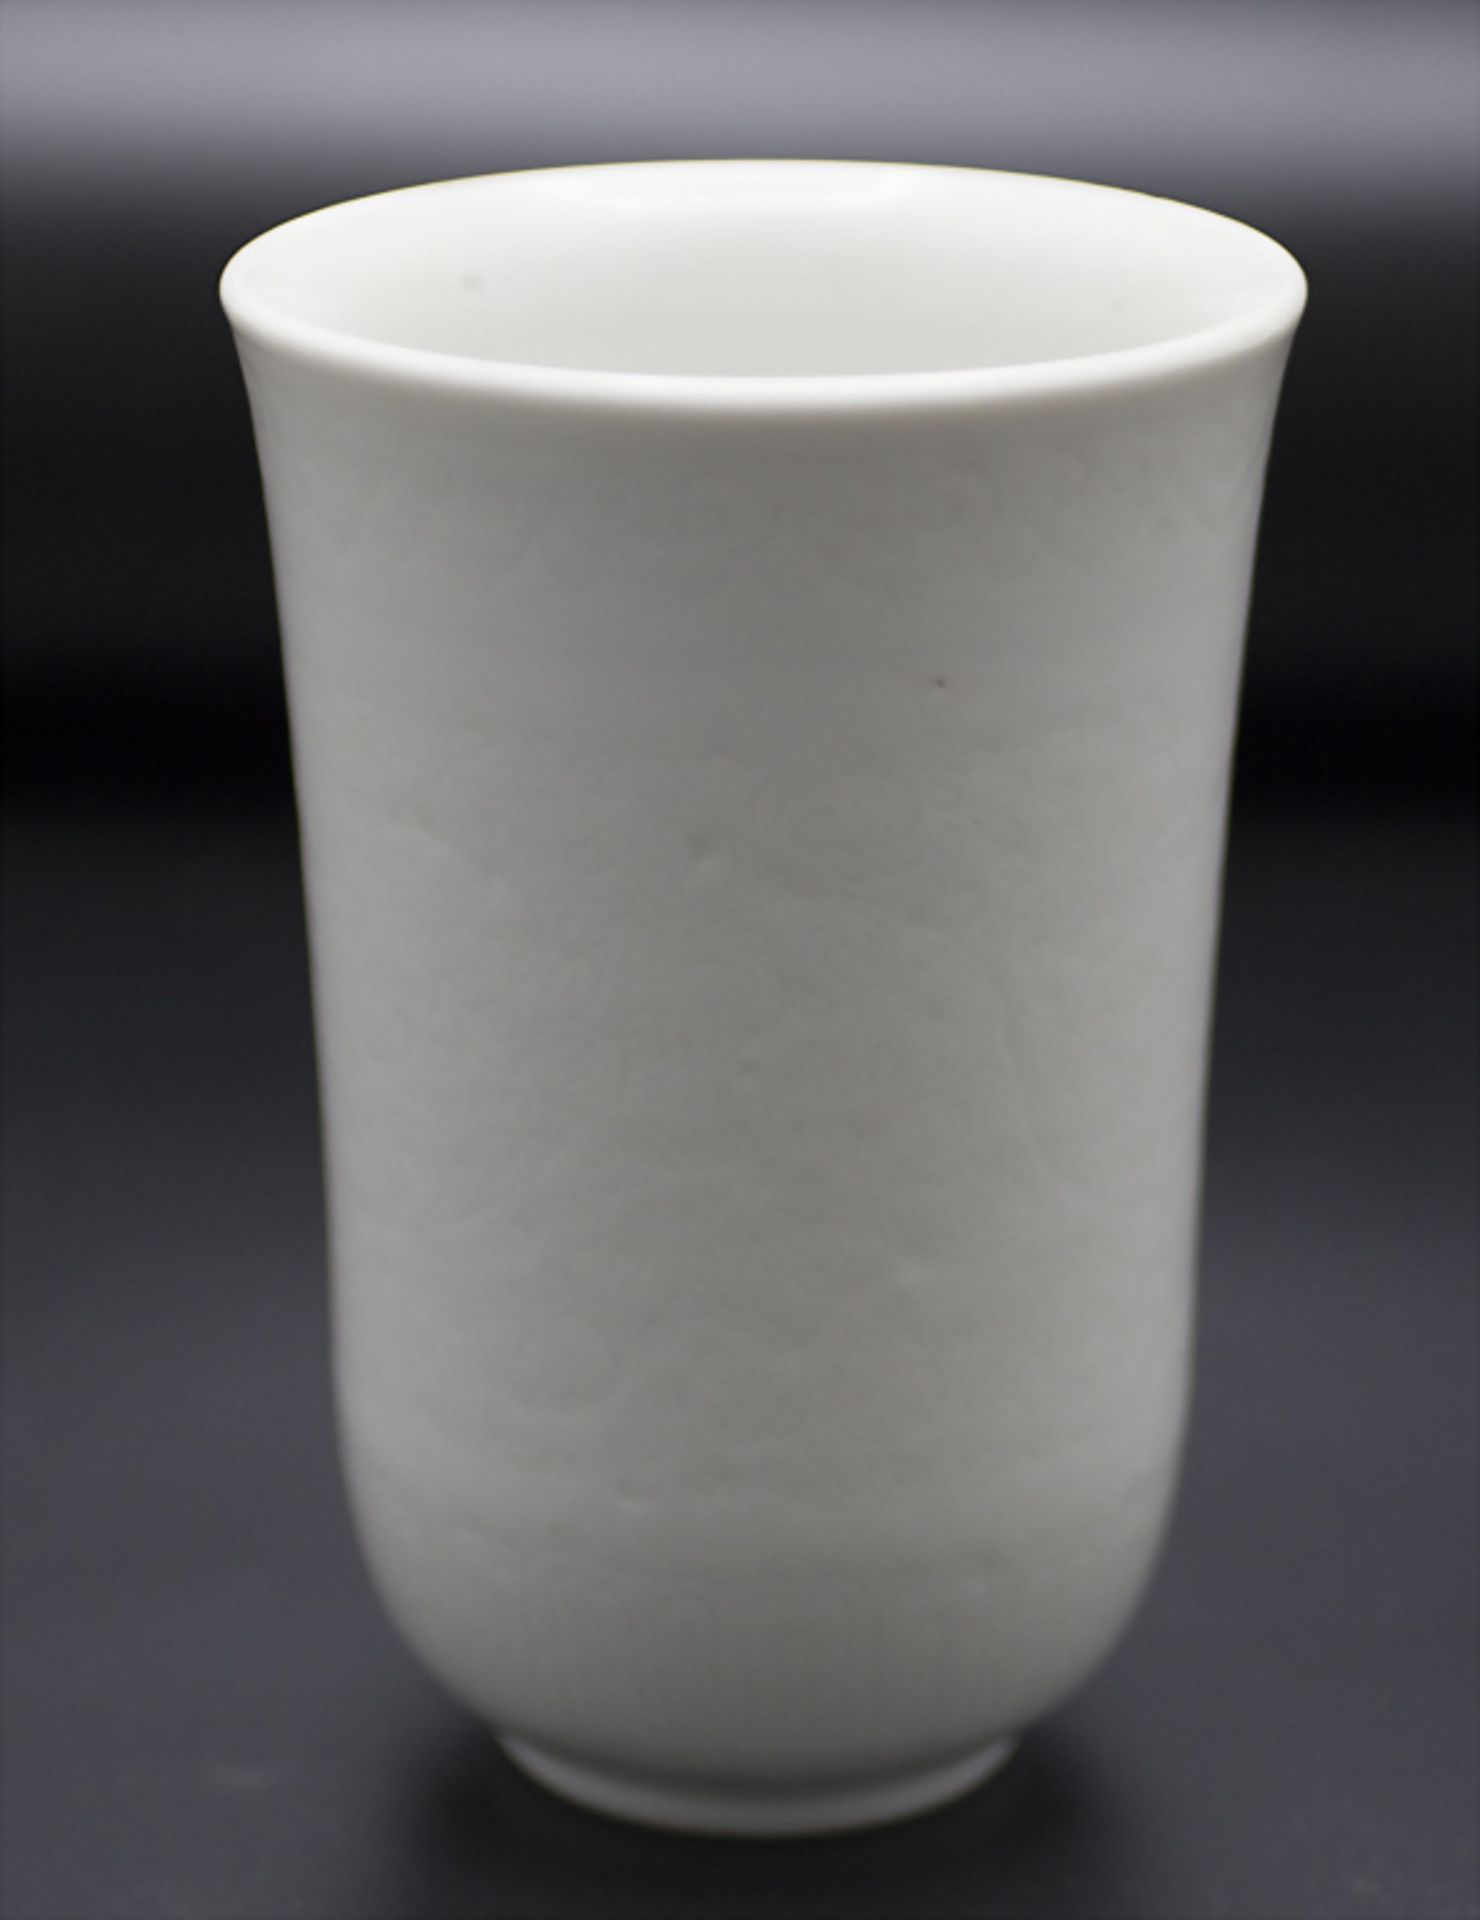 Pinselbecher / A brush cup, China, Qing Dynastie (1644-1911), Chia Ch'ing-Periode (1796-1820)